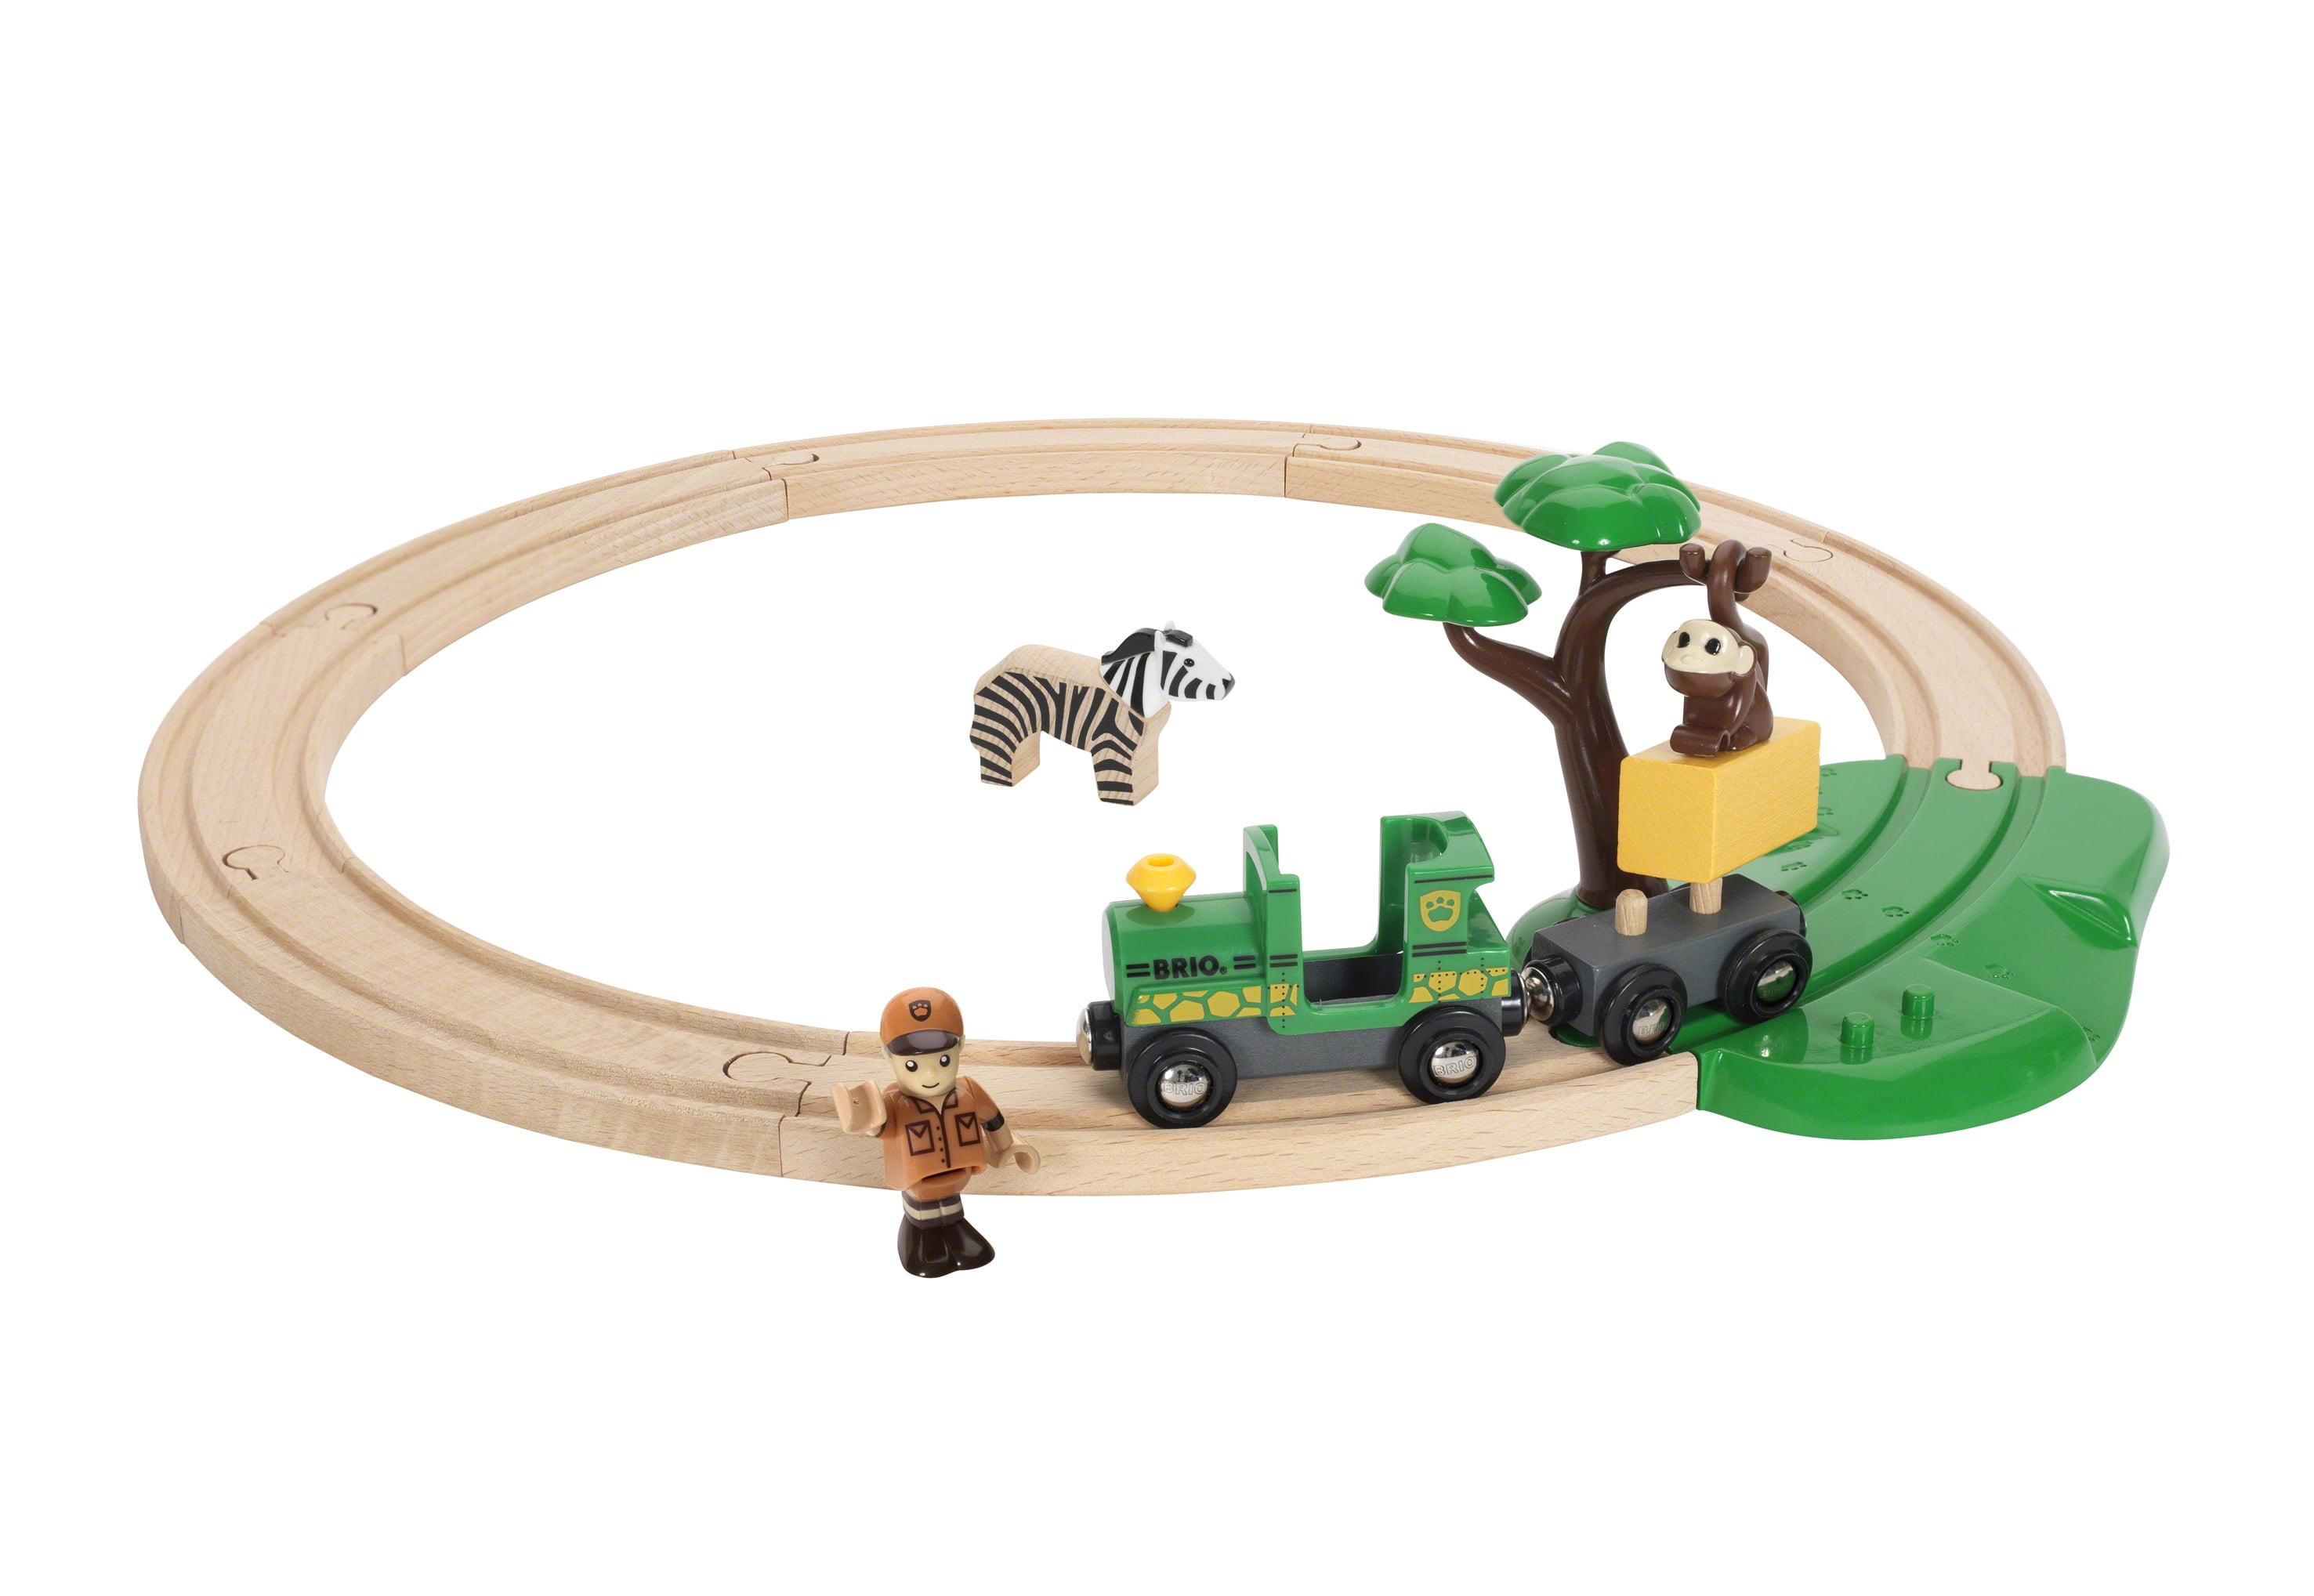 LOT of Wooden Train Brio Compatible Assorted Track Wood Pieces Kid Toys New ~VvV 